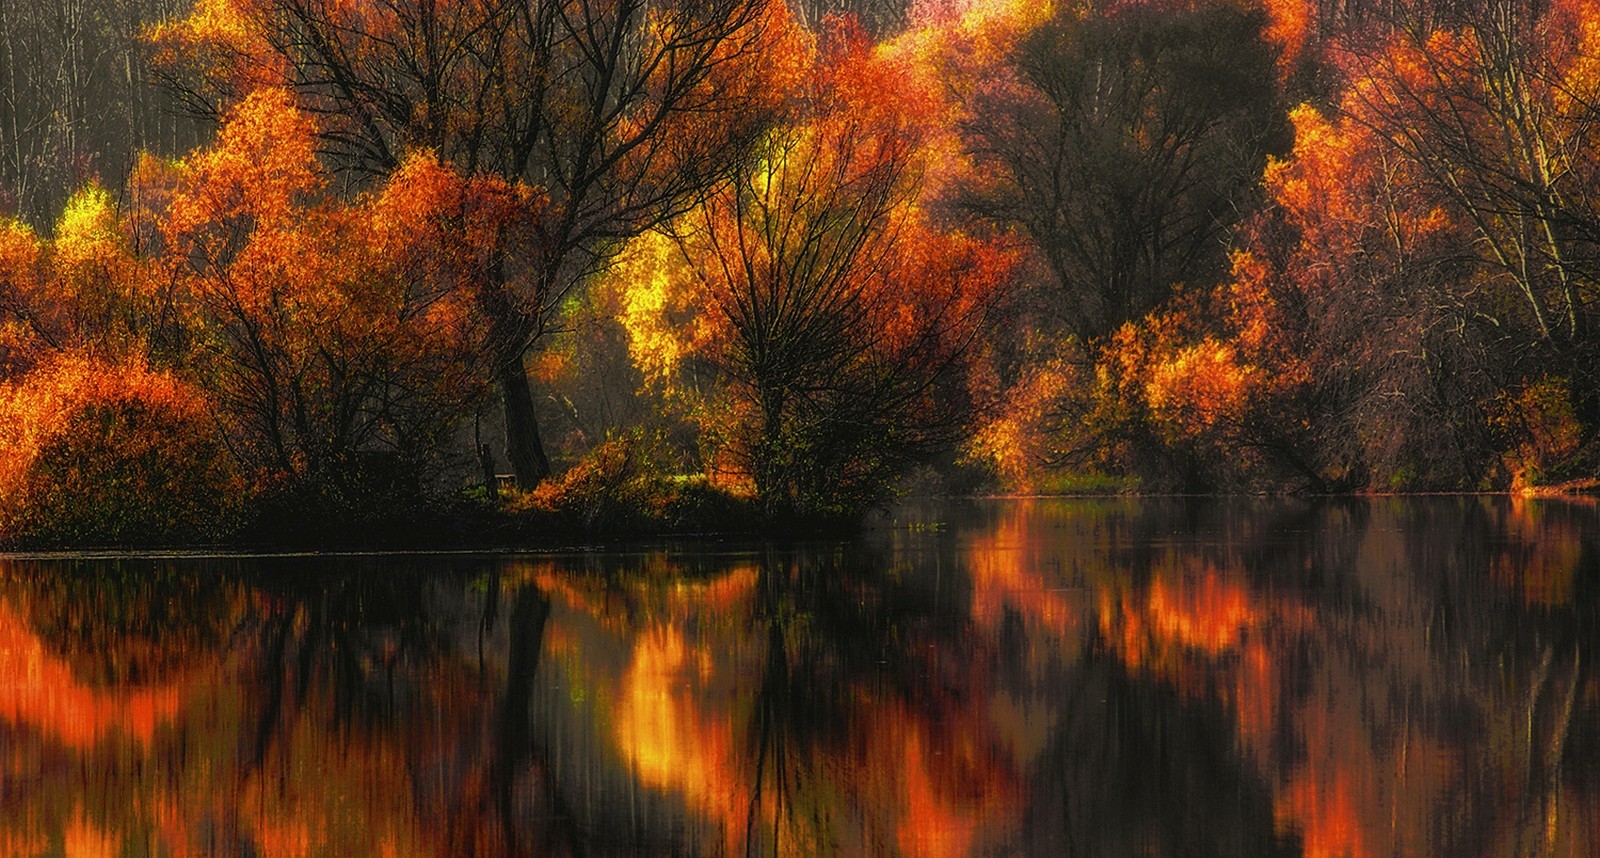 General 1600x858 nature fall colorful lake water reflection forest amber yellow leaves trees